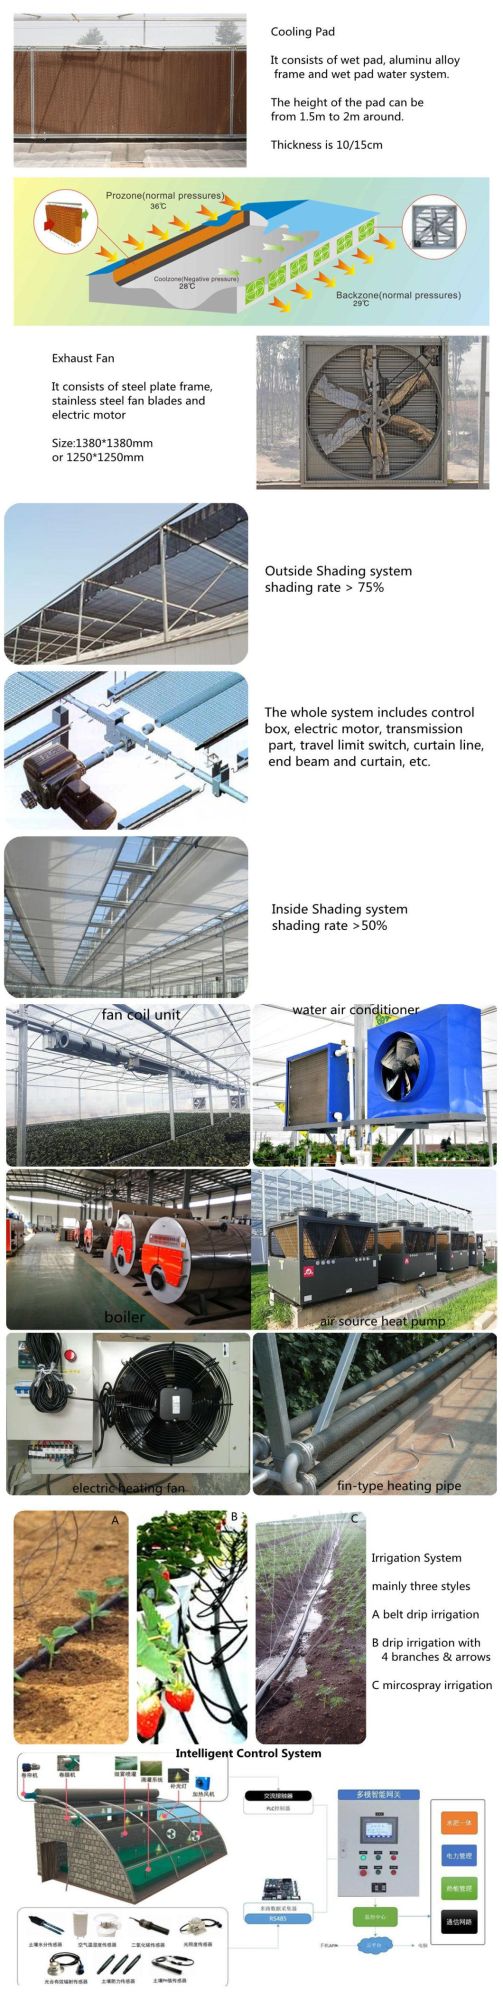 220V/50Hz Advanced Sowing Device Customized Pneumatic Sowing Machine Used Inside Greenhouse for Tray Seedling for Modern Agriculture